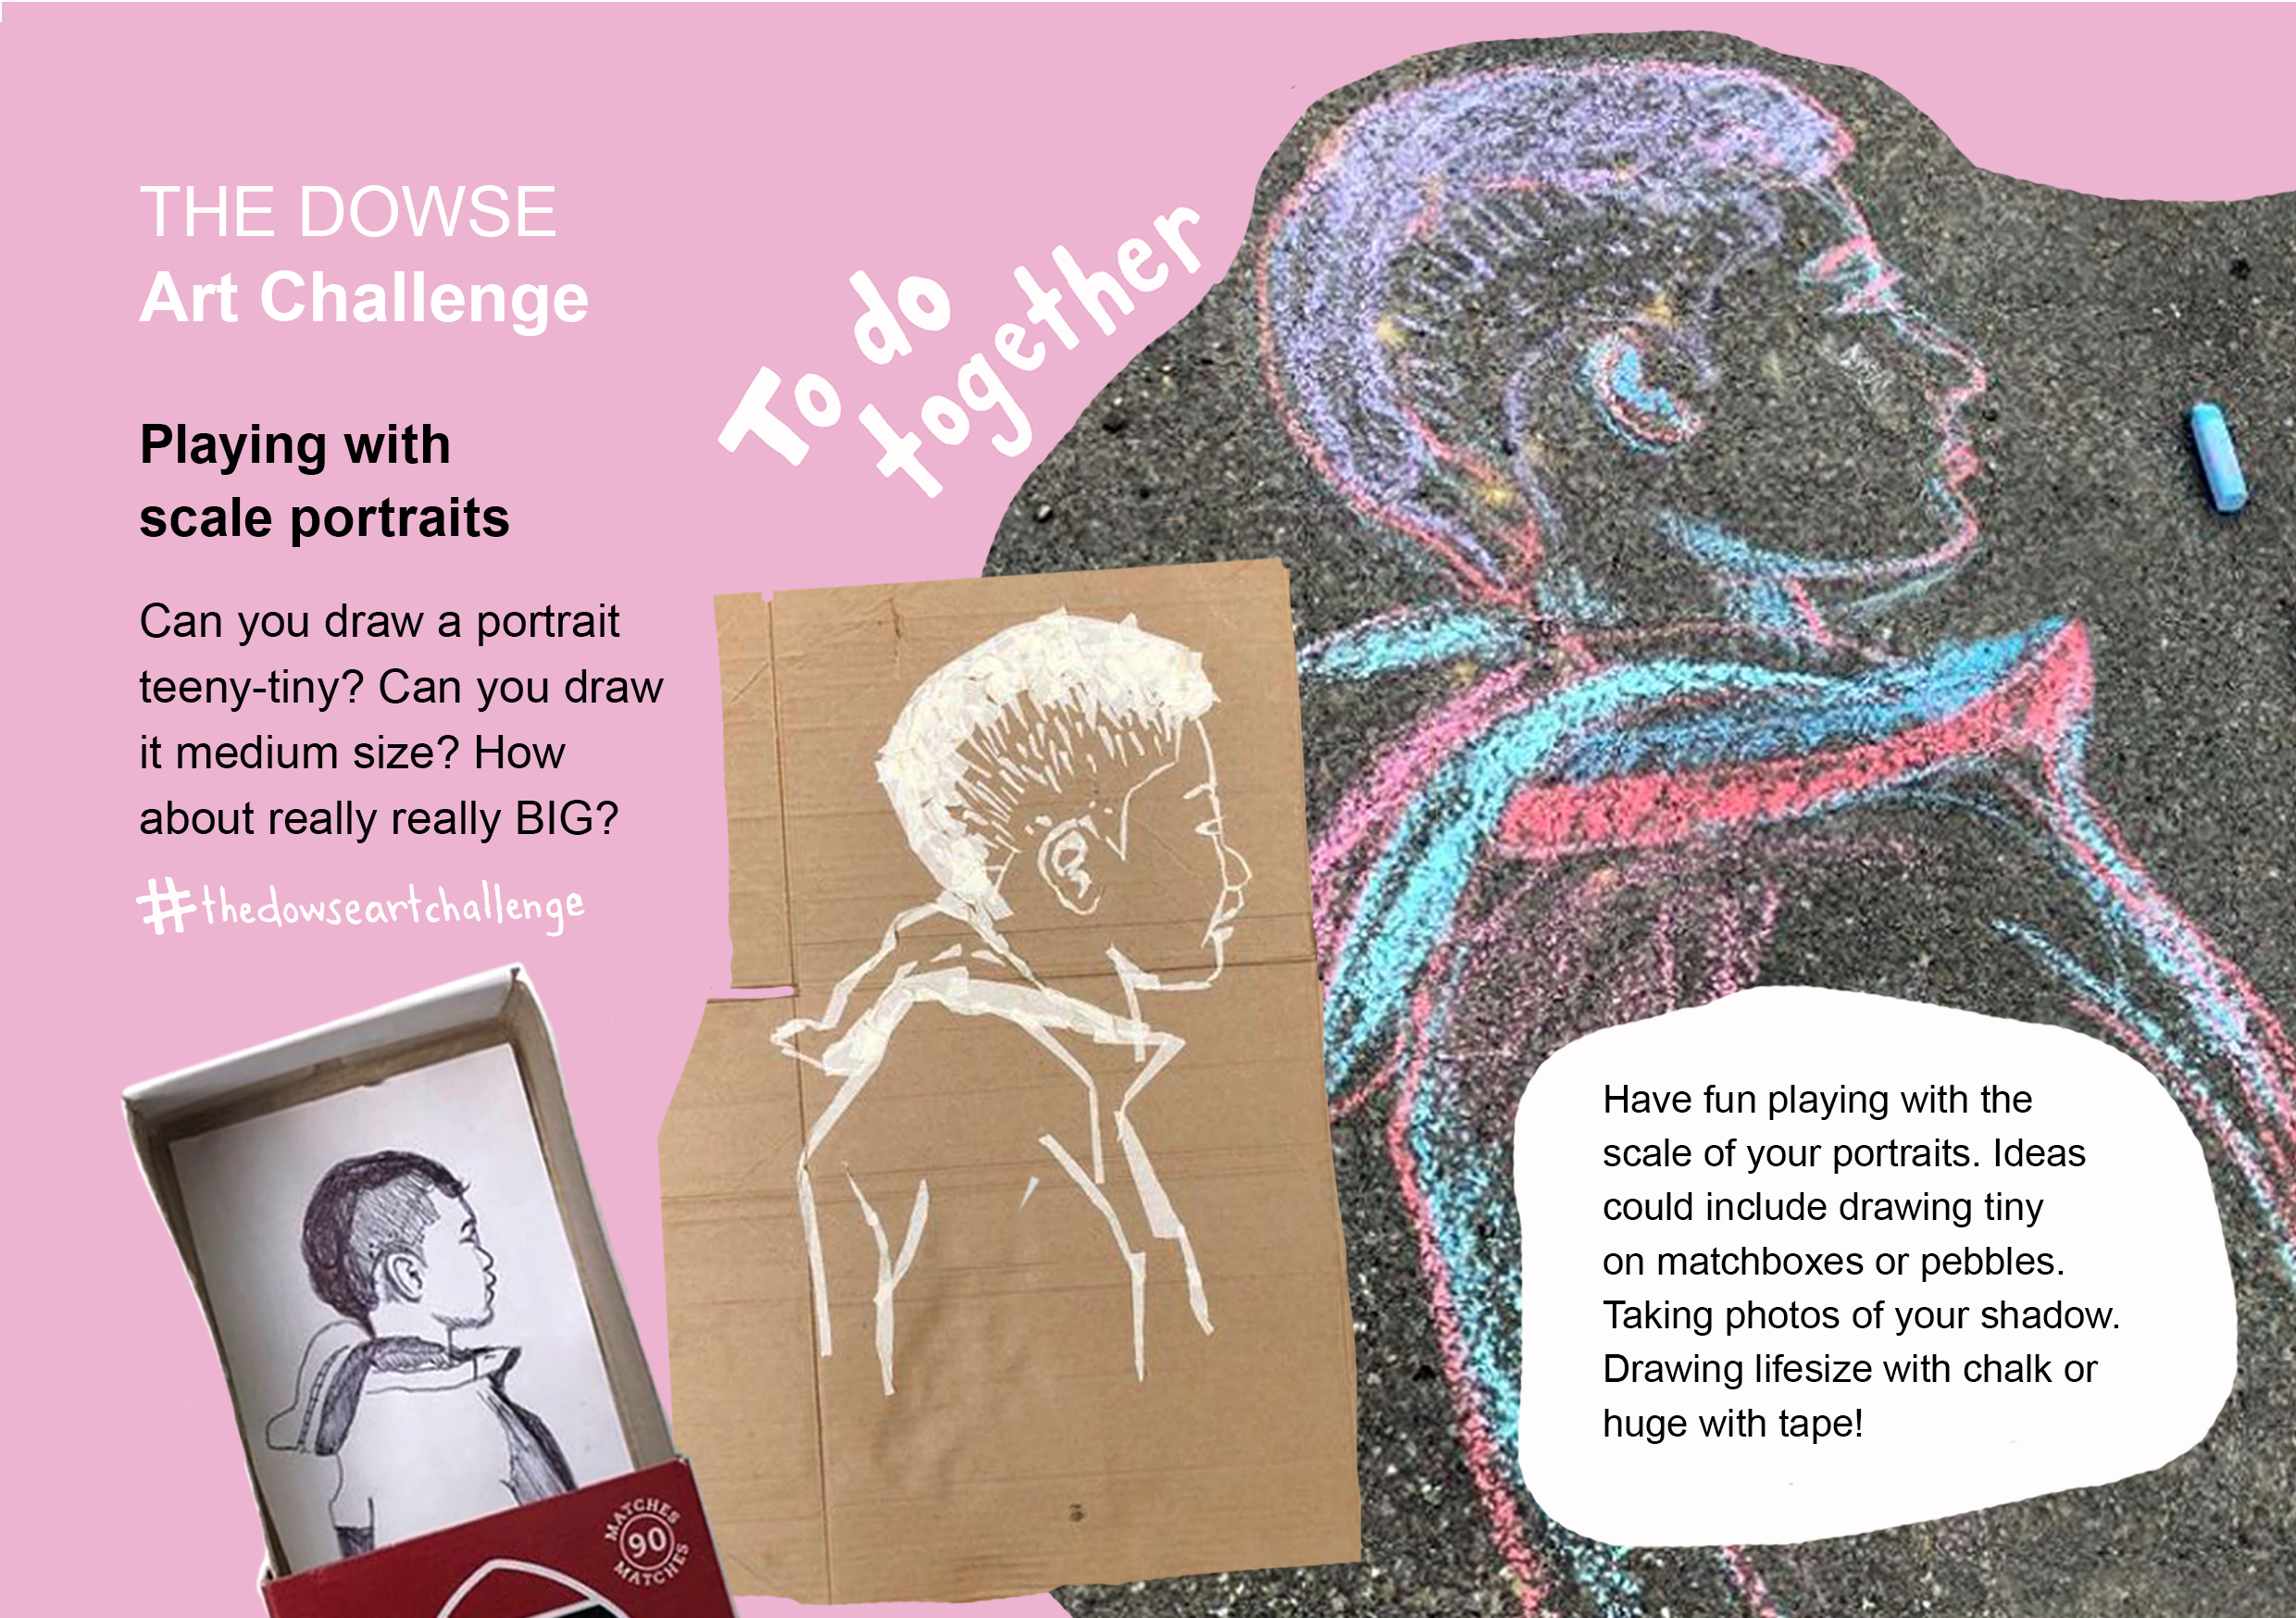 Dowse Art Challenge - Playing with scale portraits